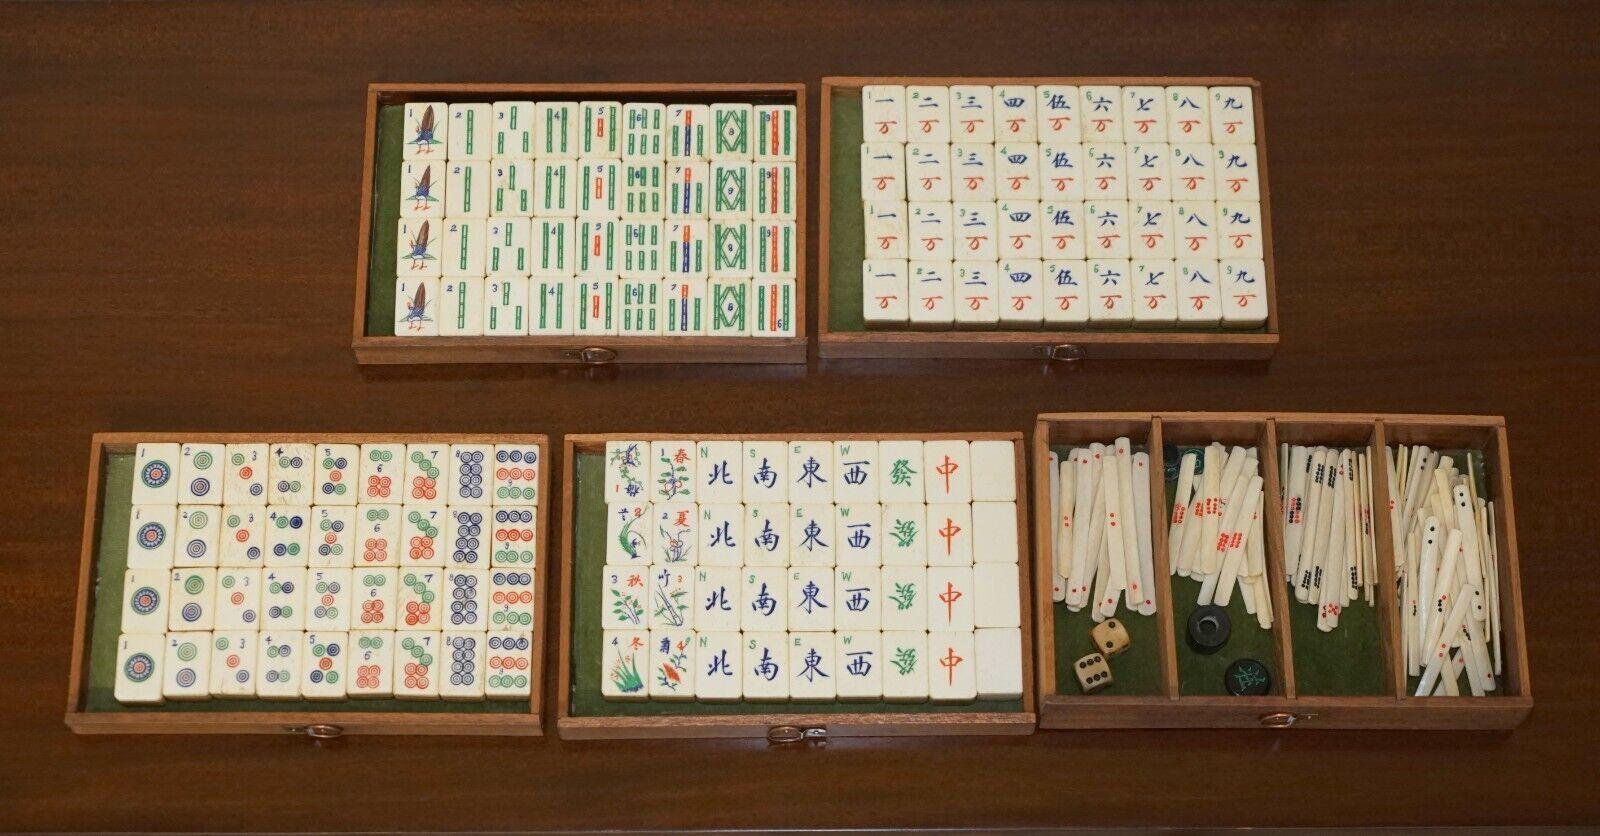 We are delighted to offer for sale this lovely original circa 1920 Chinese Mah-jong set which is totally complete with original counters, the case having a super rare Art Nouveau Liberty's London style Bronze handle 

A very nice suite, in the